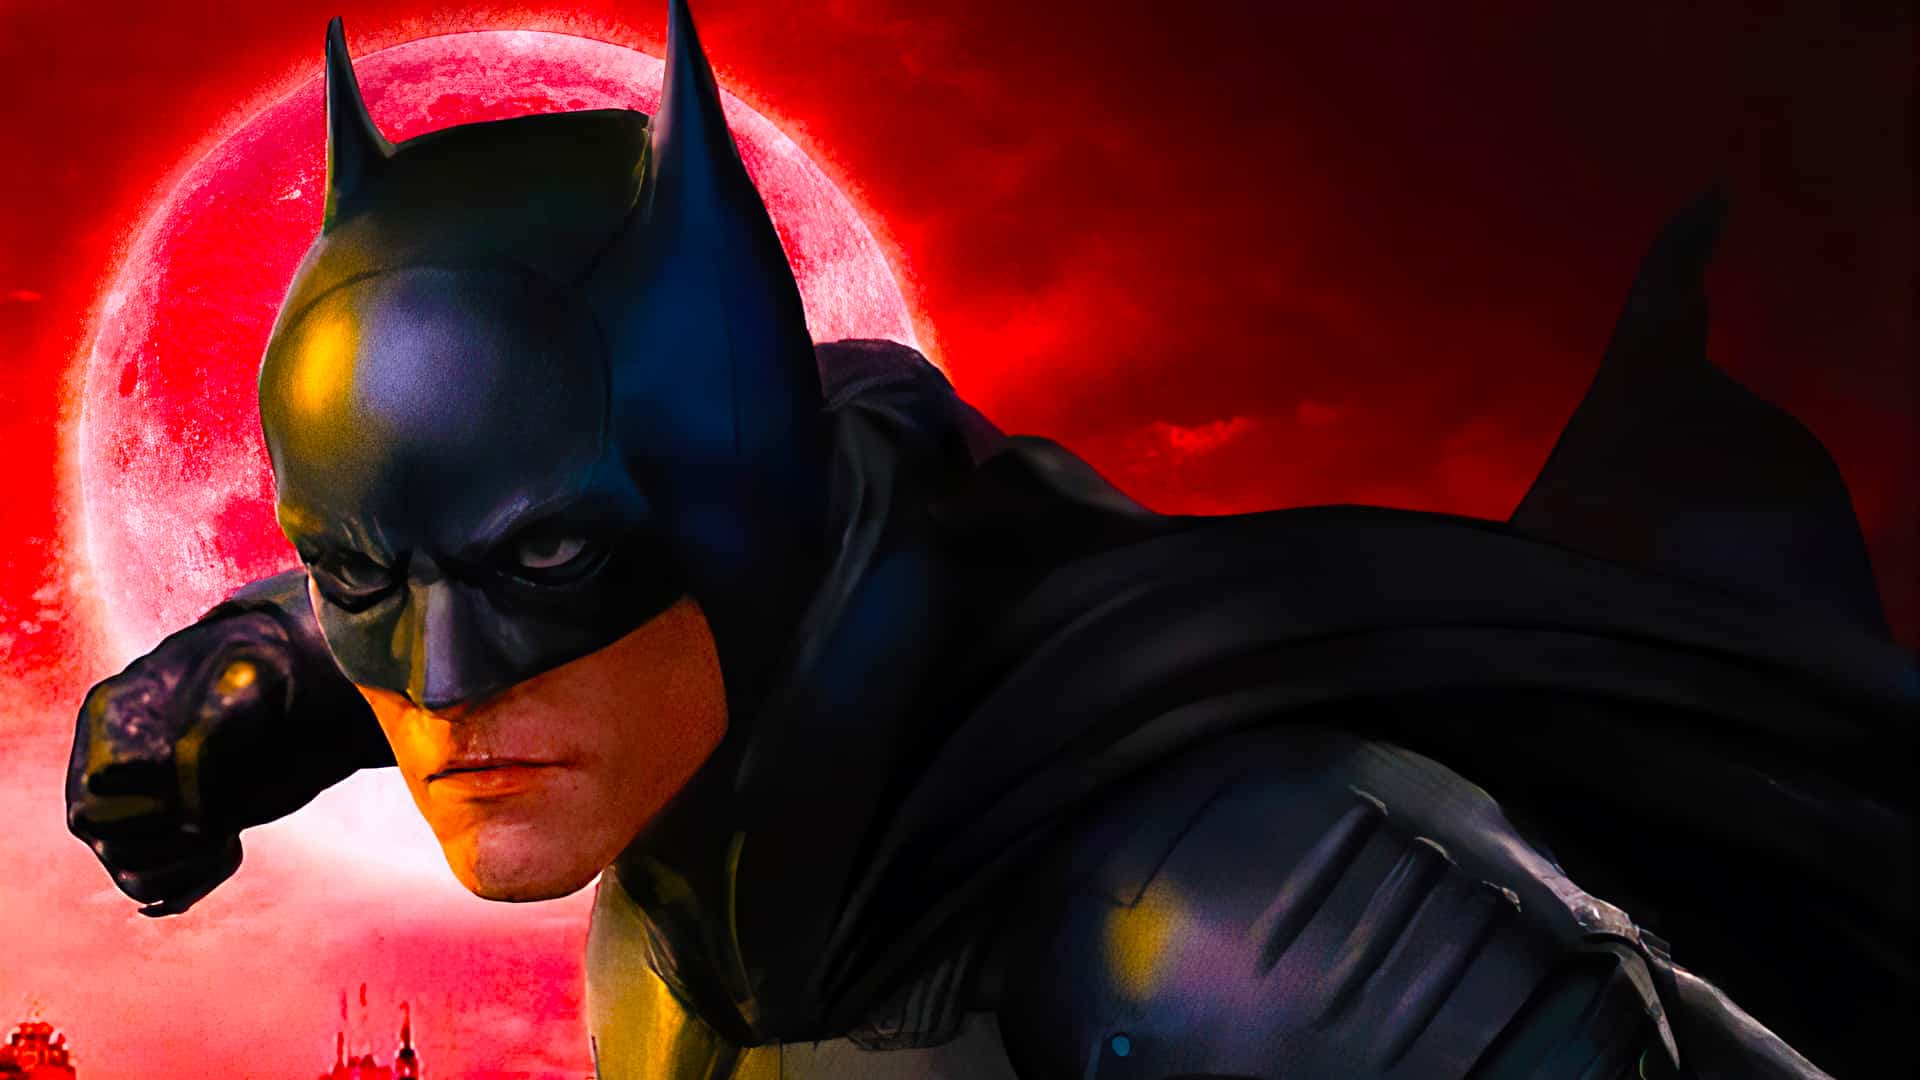 What's Happening With The Batman?